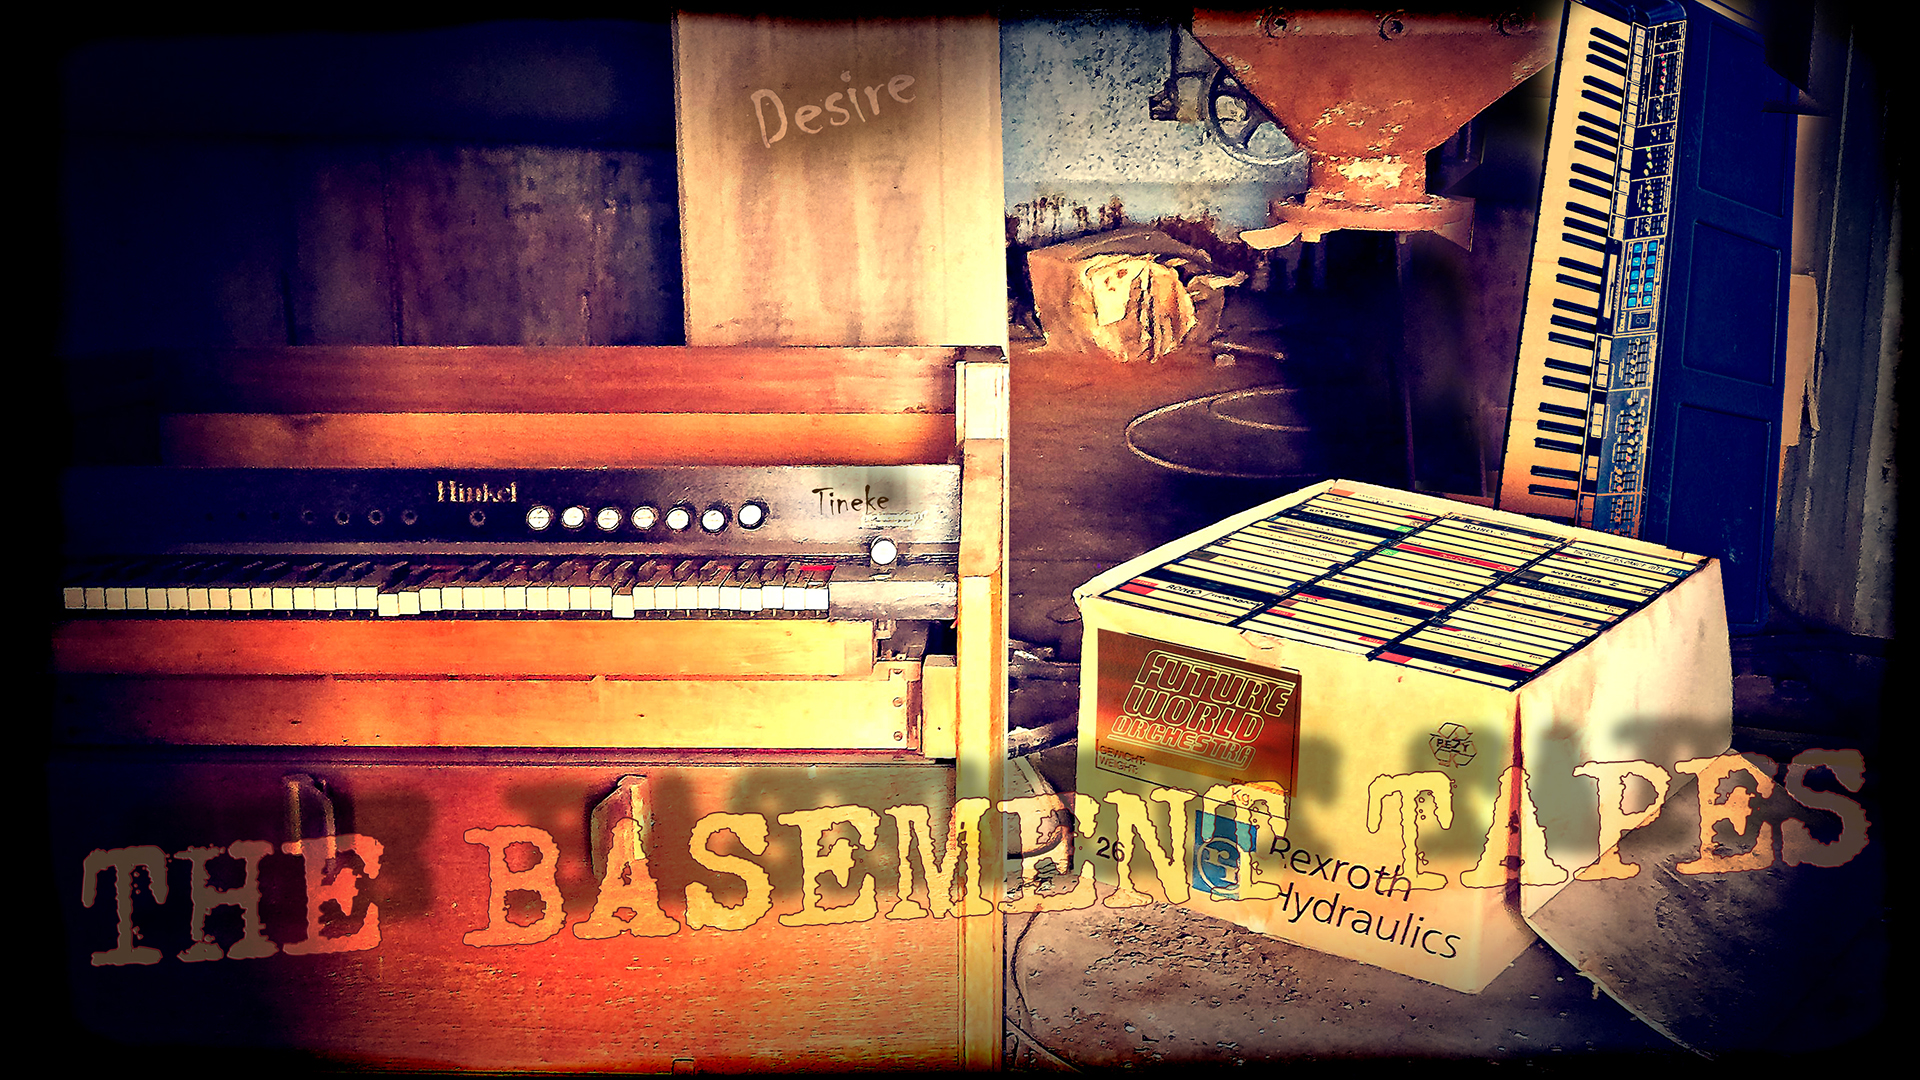 The Basement Tapes